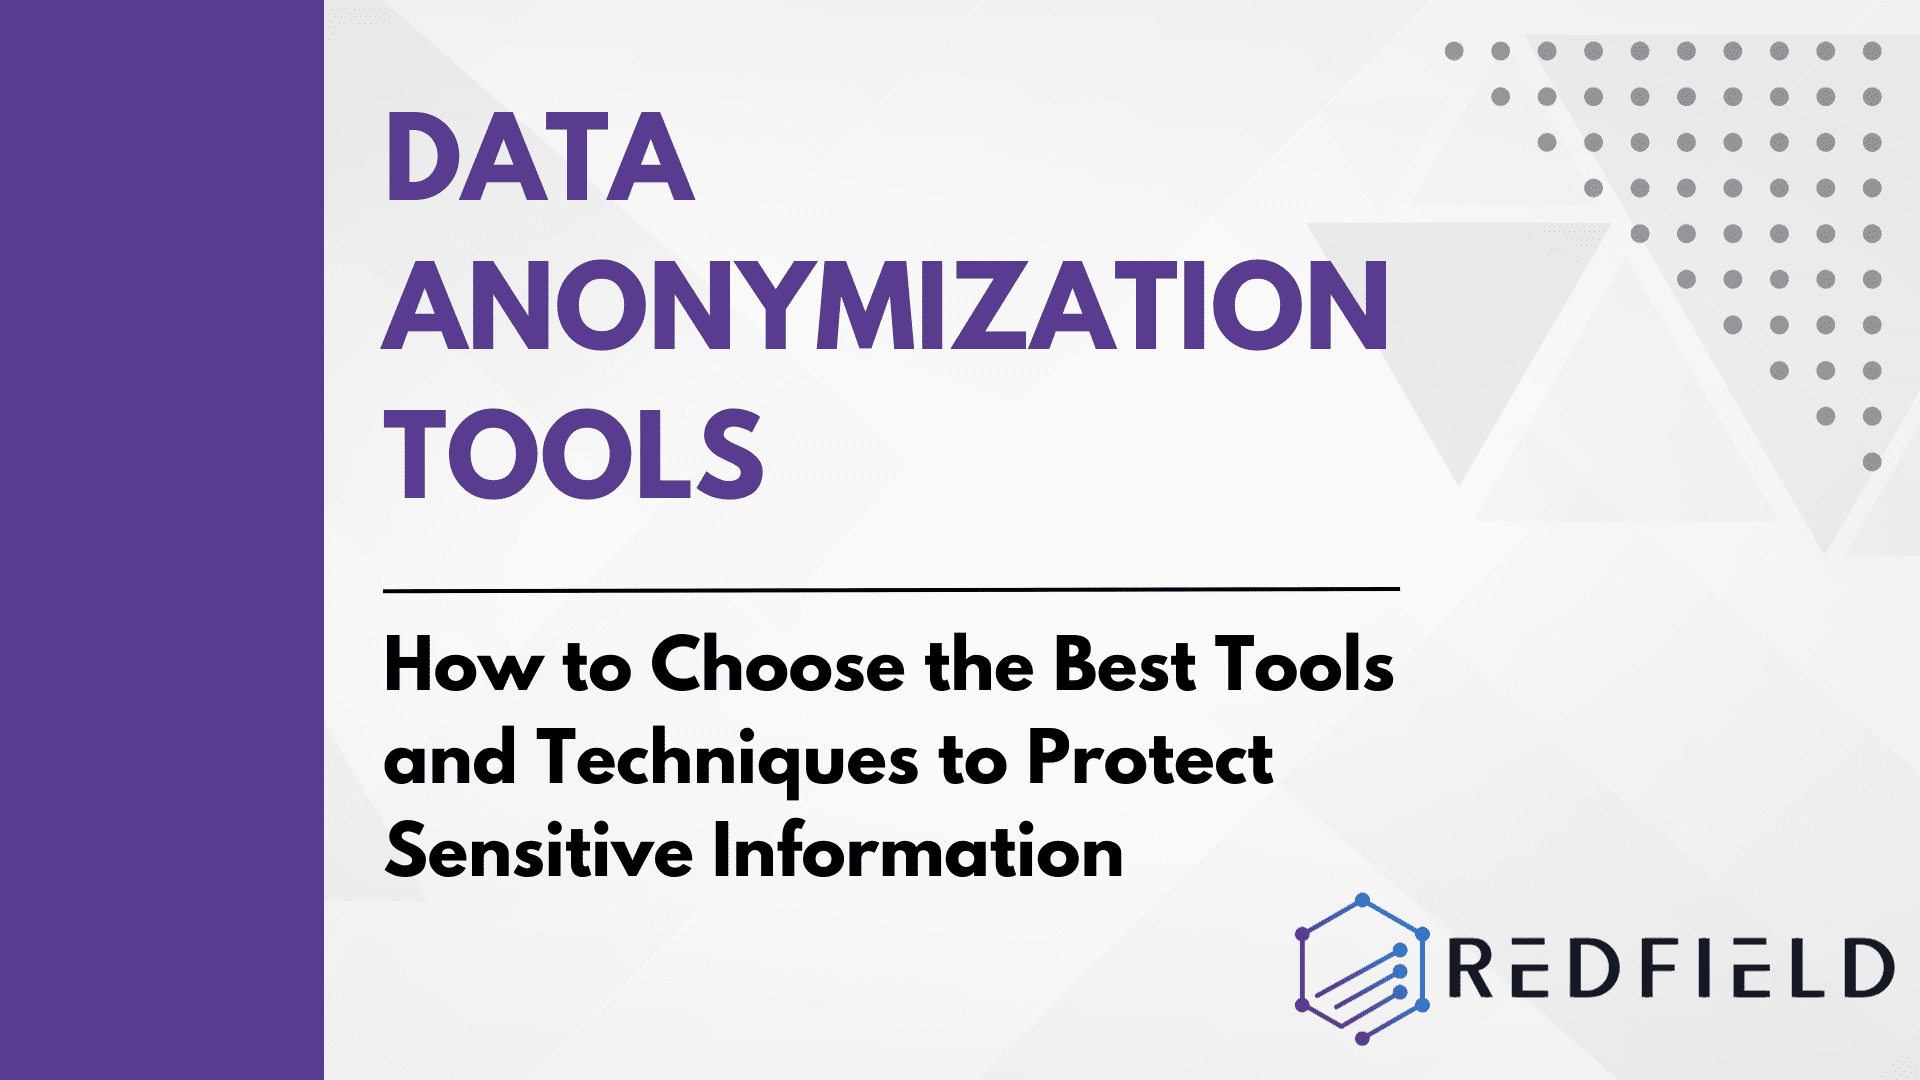 Data Anonymization Tools: How to Choose the Best Tools and Techniques to Protect Sensitive Information